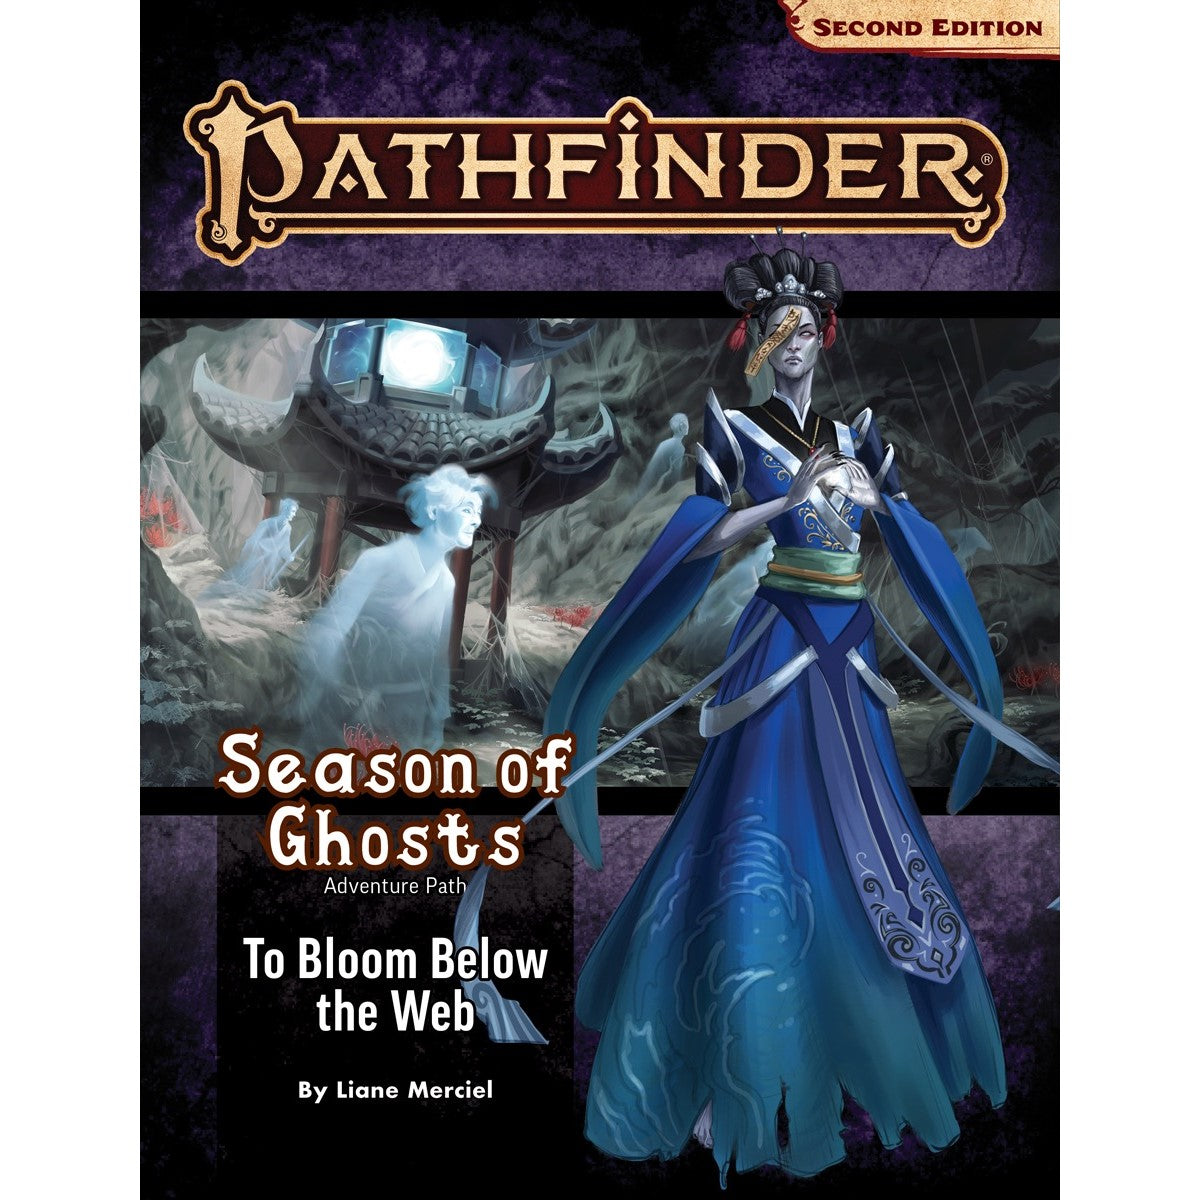 Pathfinder Second Edition - Adventure Path Season of Ghosts #4 To Bloom Below the Web